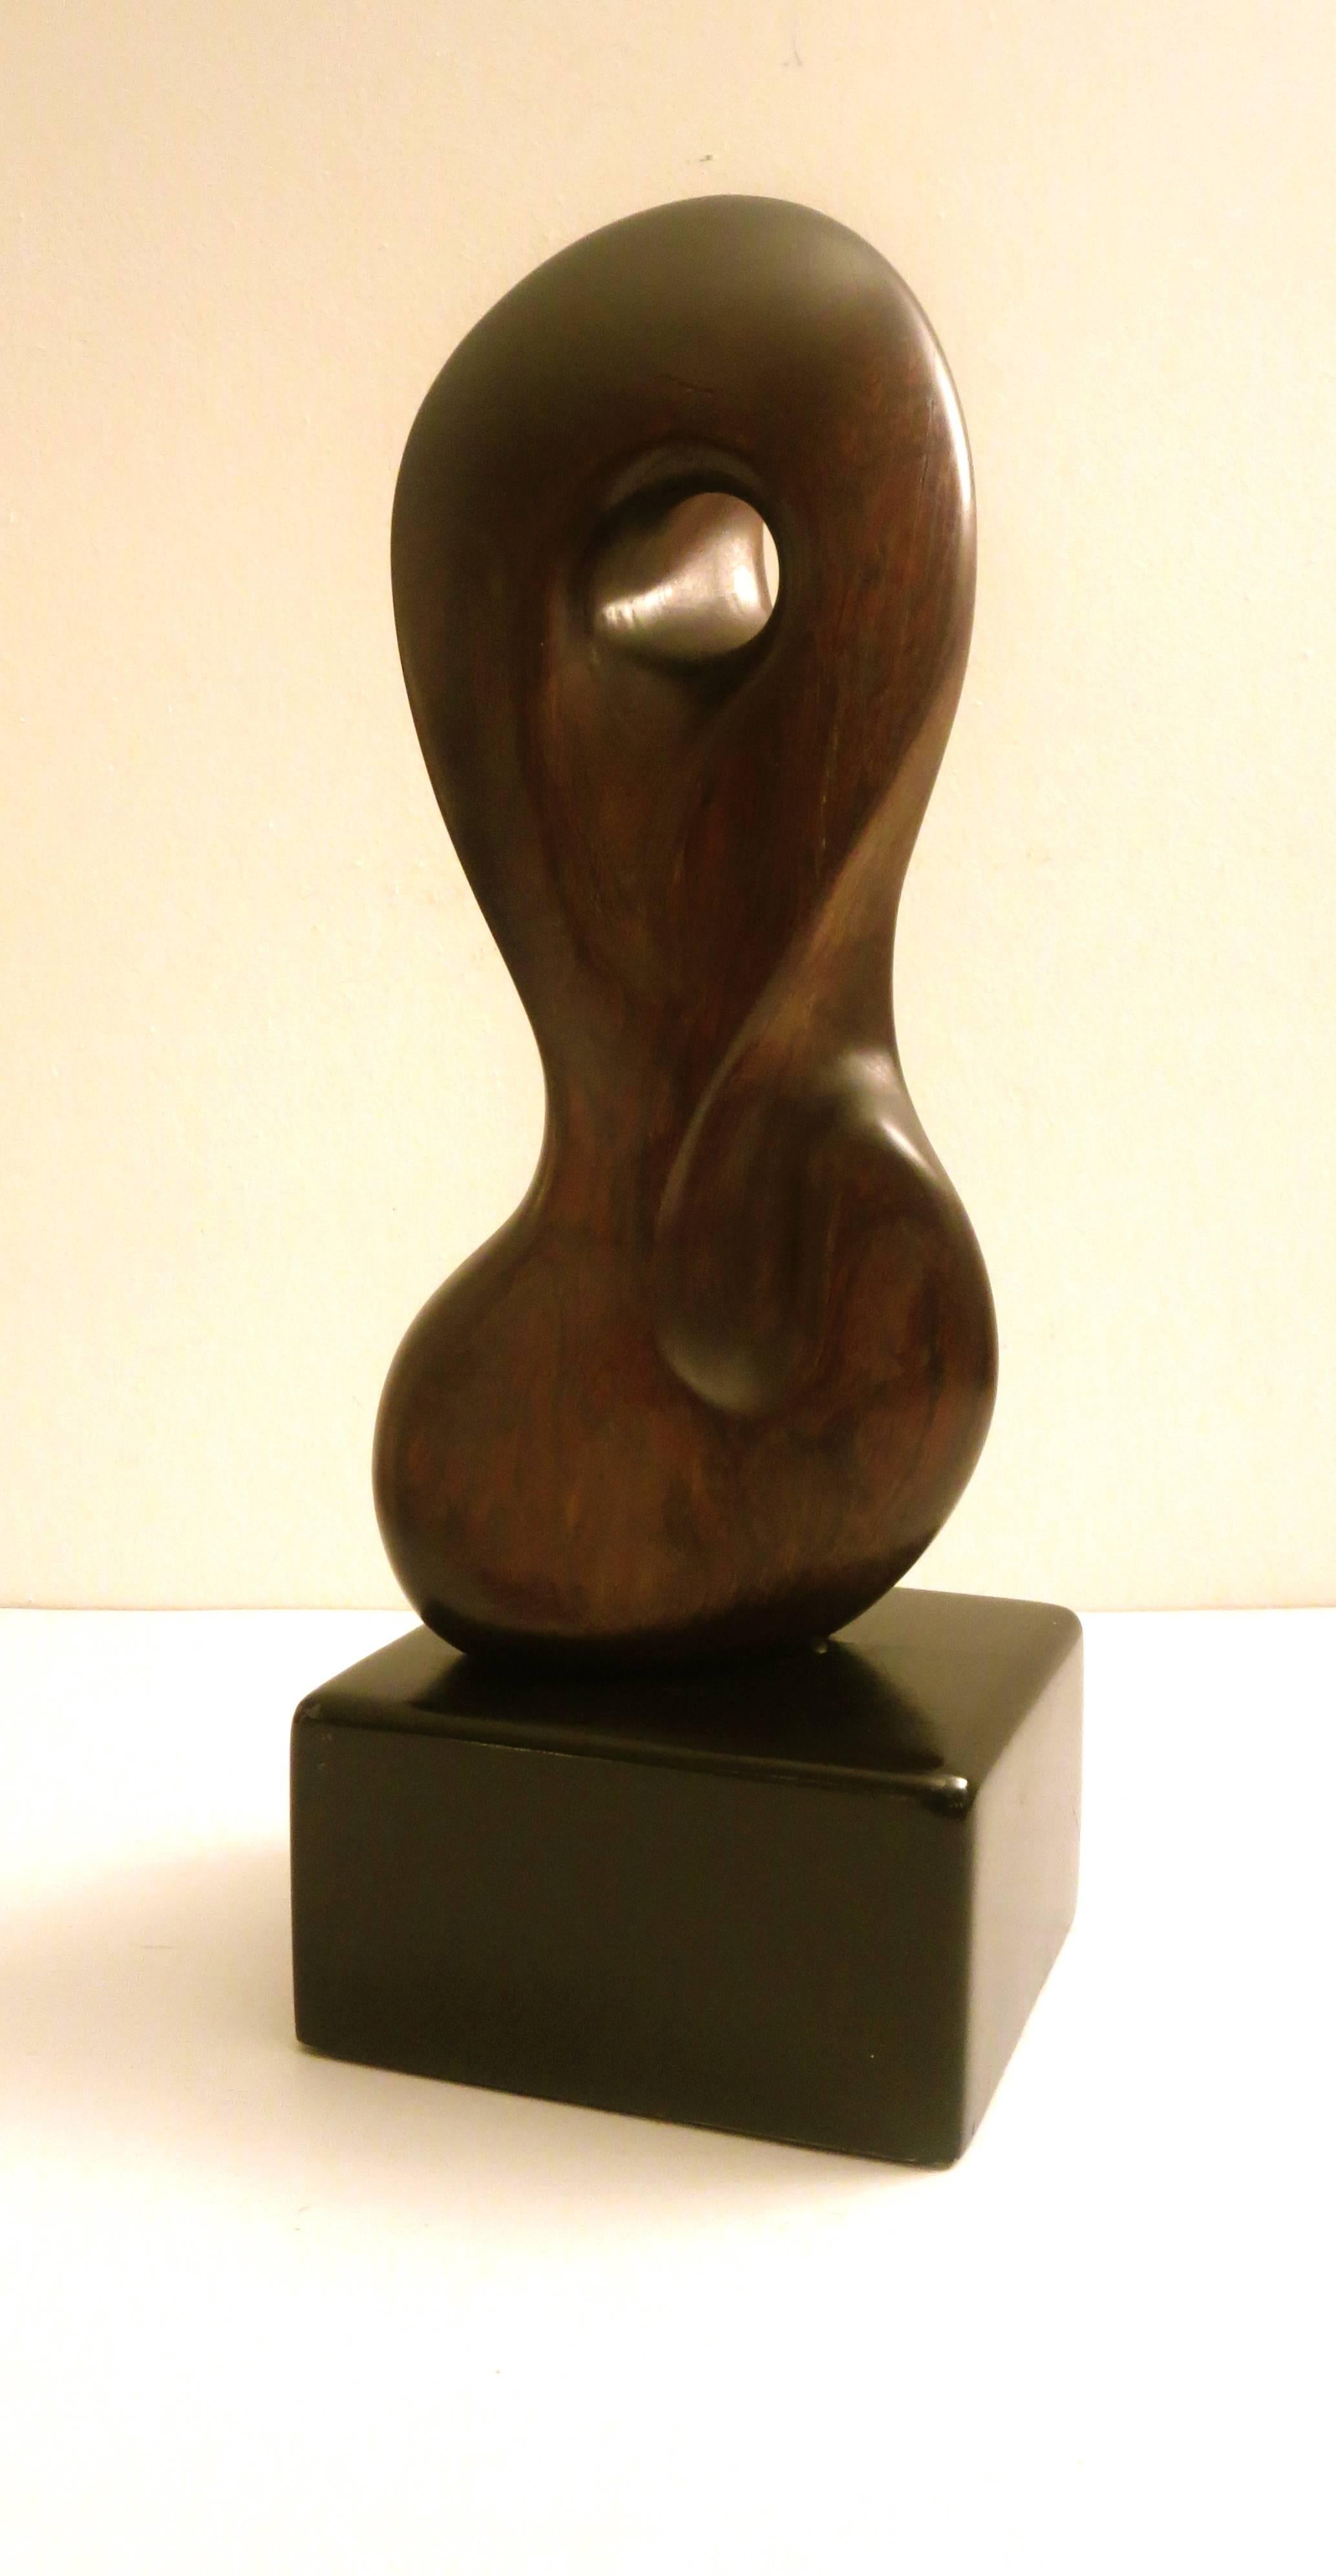 Incredible one of a kind biomorphic sculpture by California listed artist Jocko Johnson, sculpted ironwood free-form on back lacquer solid wood black base, beautiful shape in its original condition and patina, comes from a local state where the